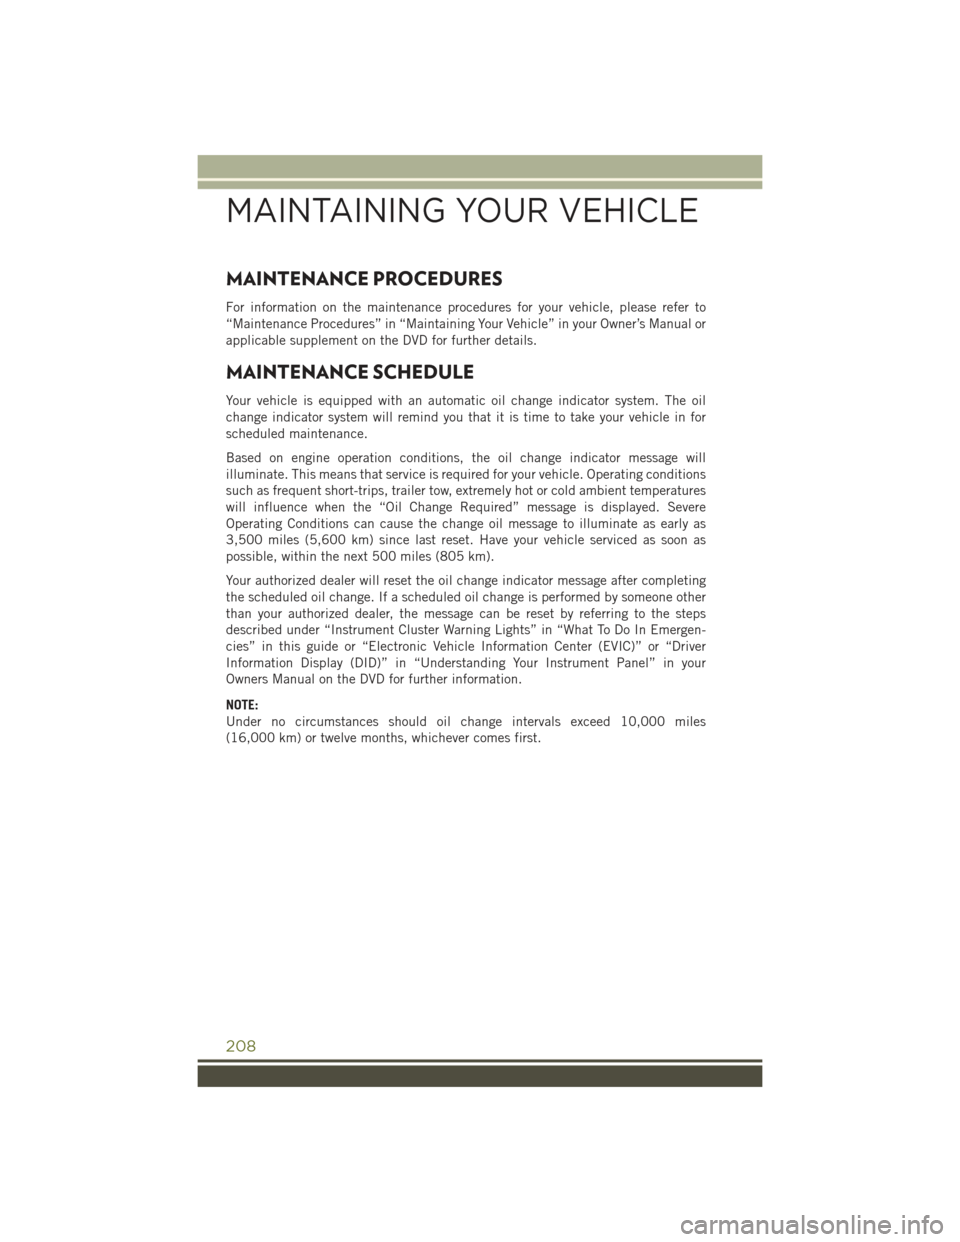 JEEP CHEROKEE 2015 KL / 5.G User Guide MAINTENANCE PROCEDURES
For information on the maintenance procedures for your vehicle, please refer to
“Maintenance Procedures” in “Maintaining Your Vehicle” in your Owner’s Manual or
applic